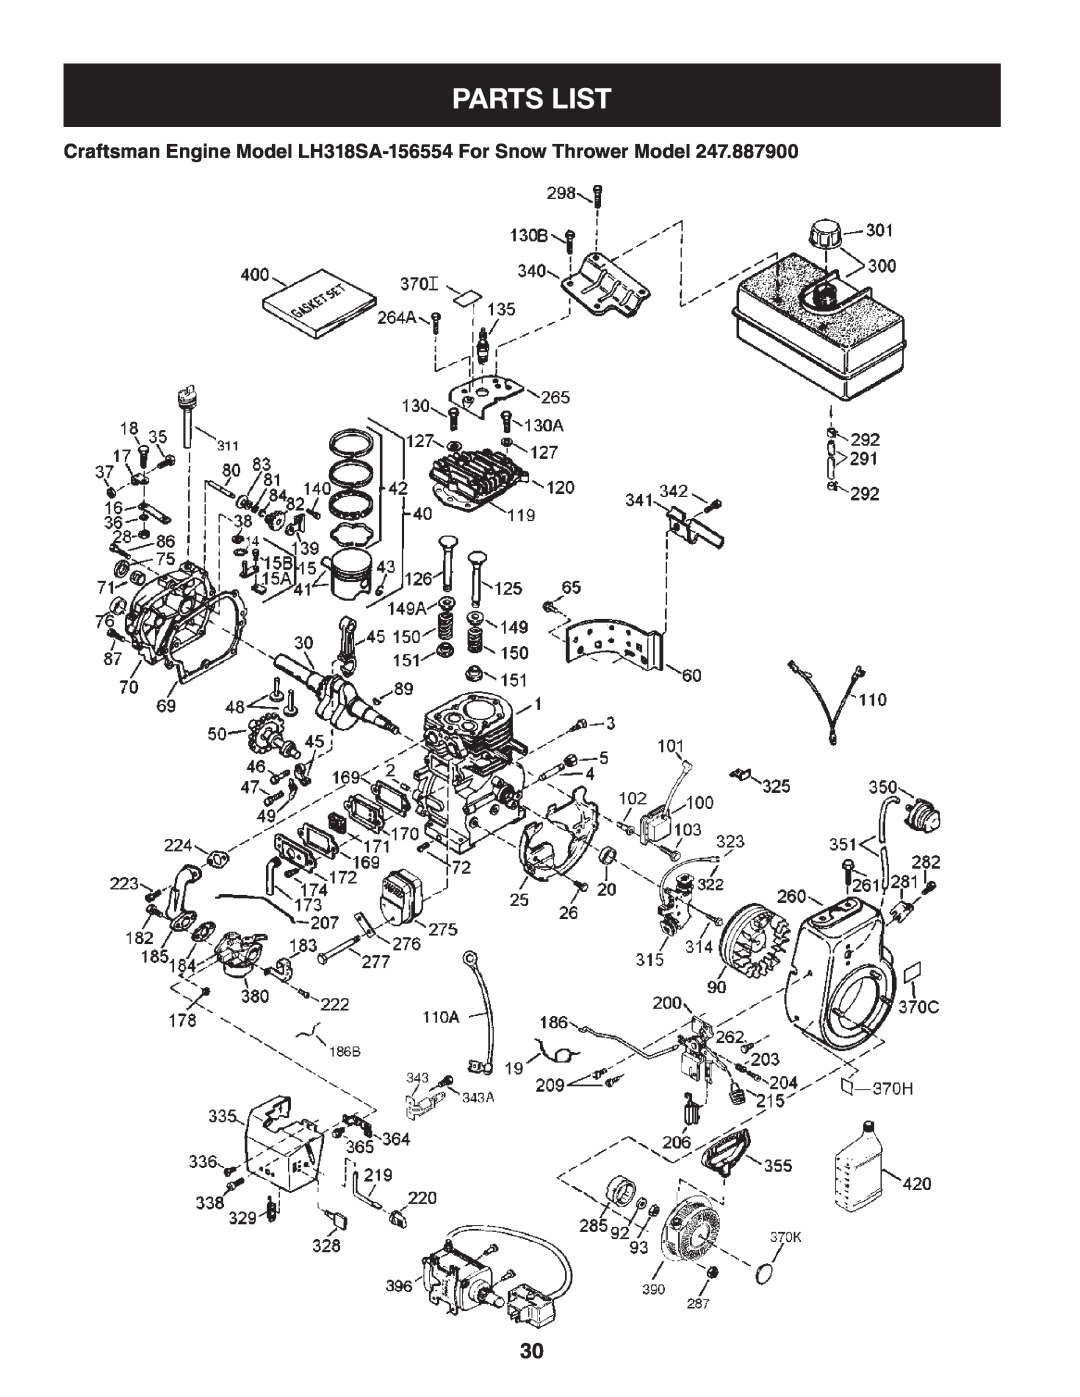 Sears 247.8879 operating instructions Parts List, Craftsman Engine Model LH318SA-156554 For Snow Thrower Model 